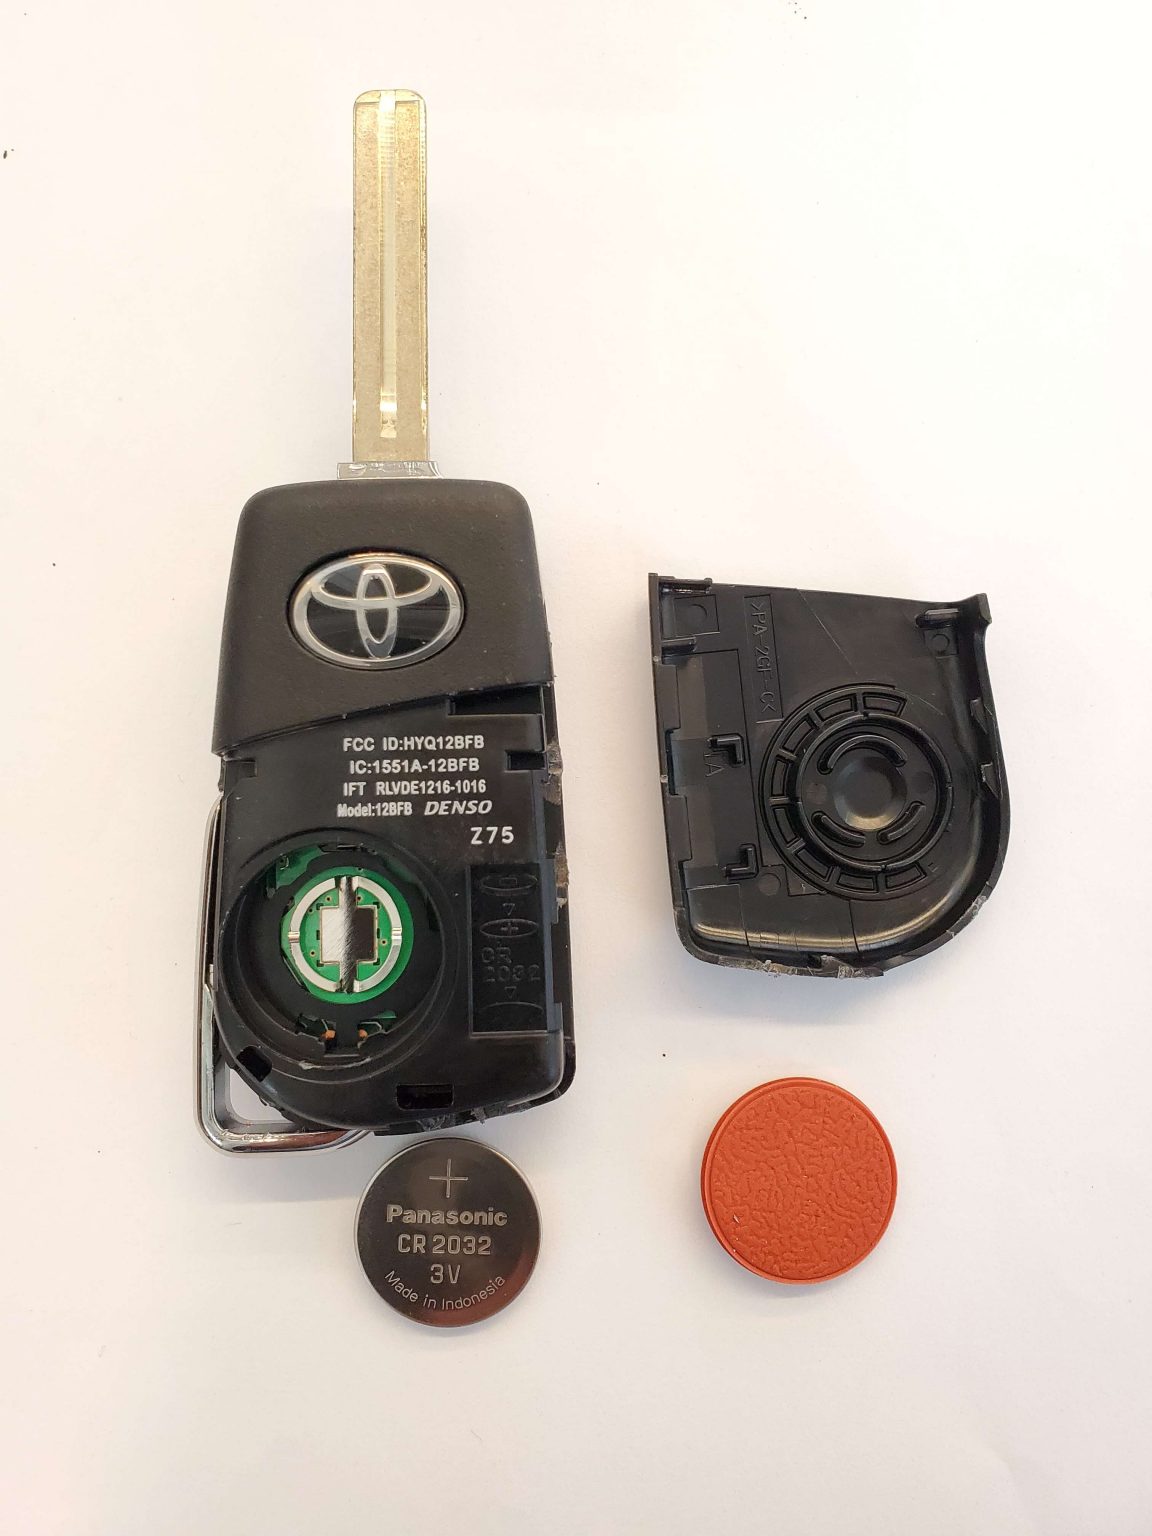 Toyota Corolla Replacement Keys What To Do, Options, Cost & More